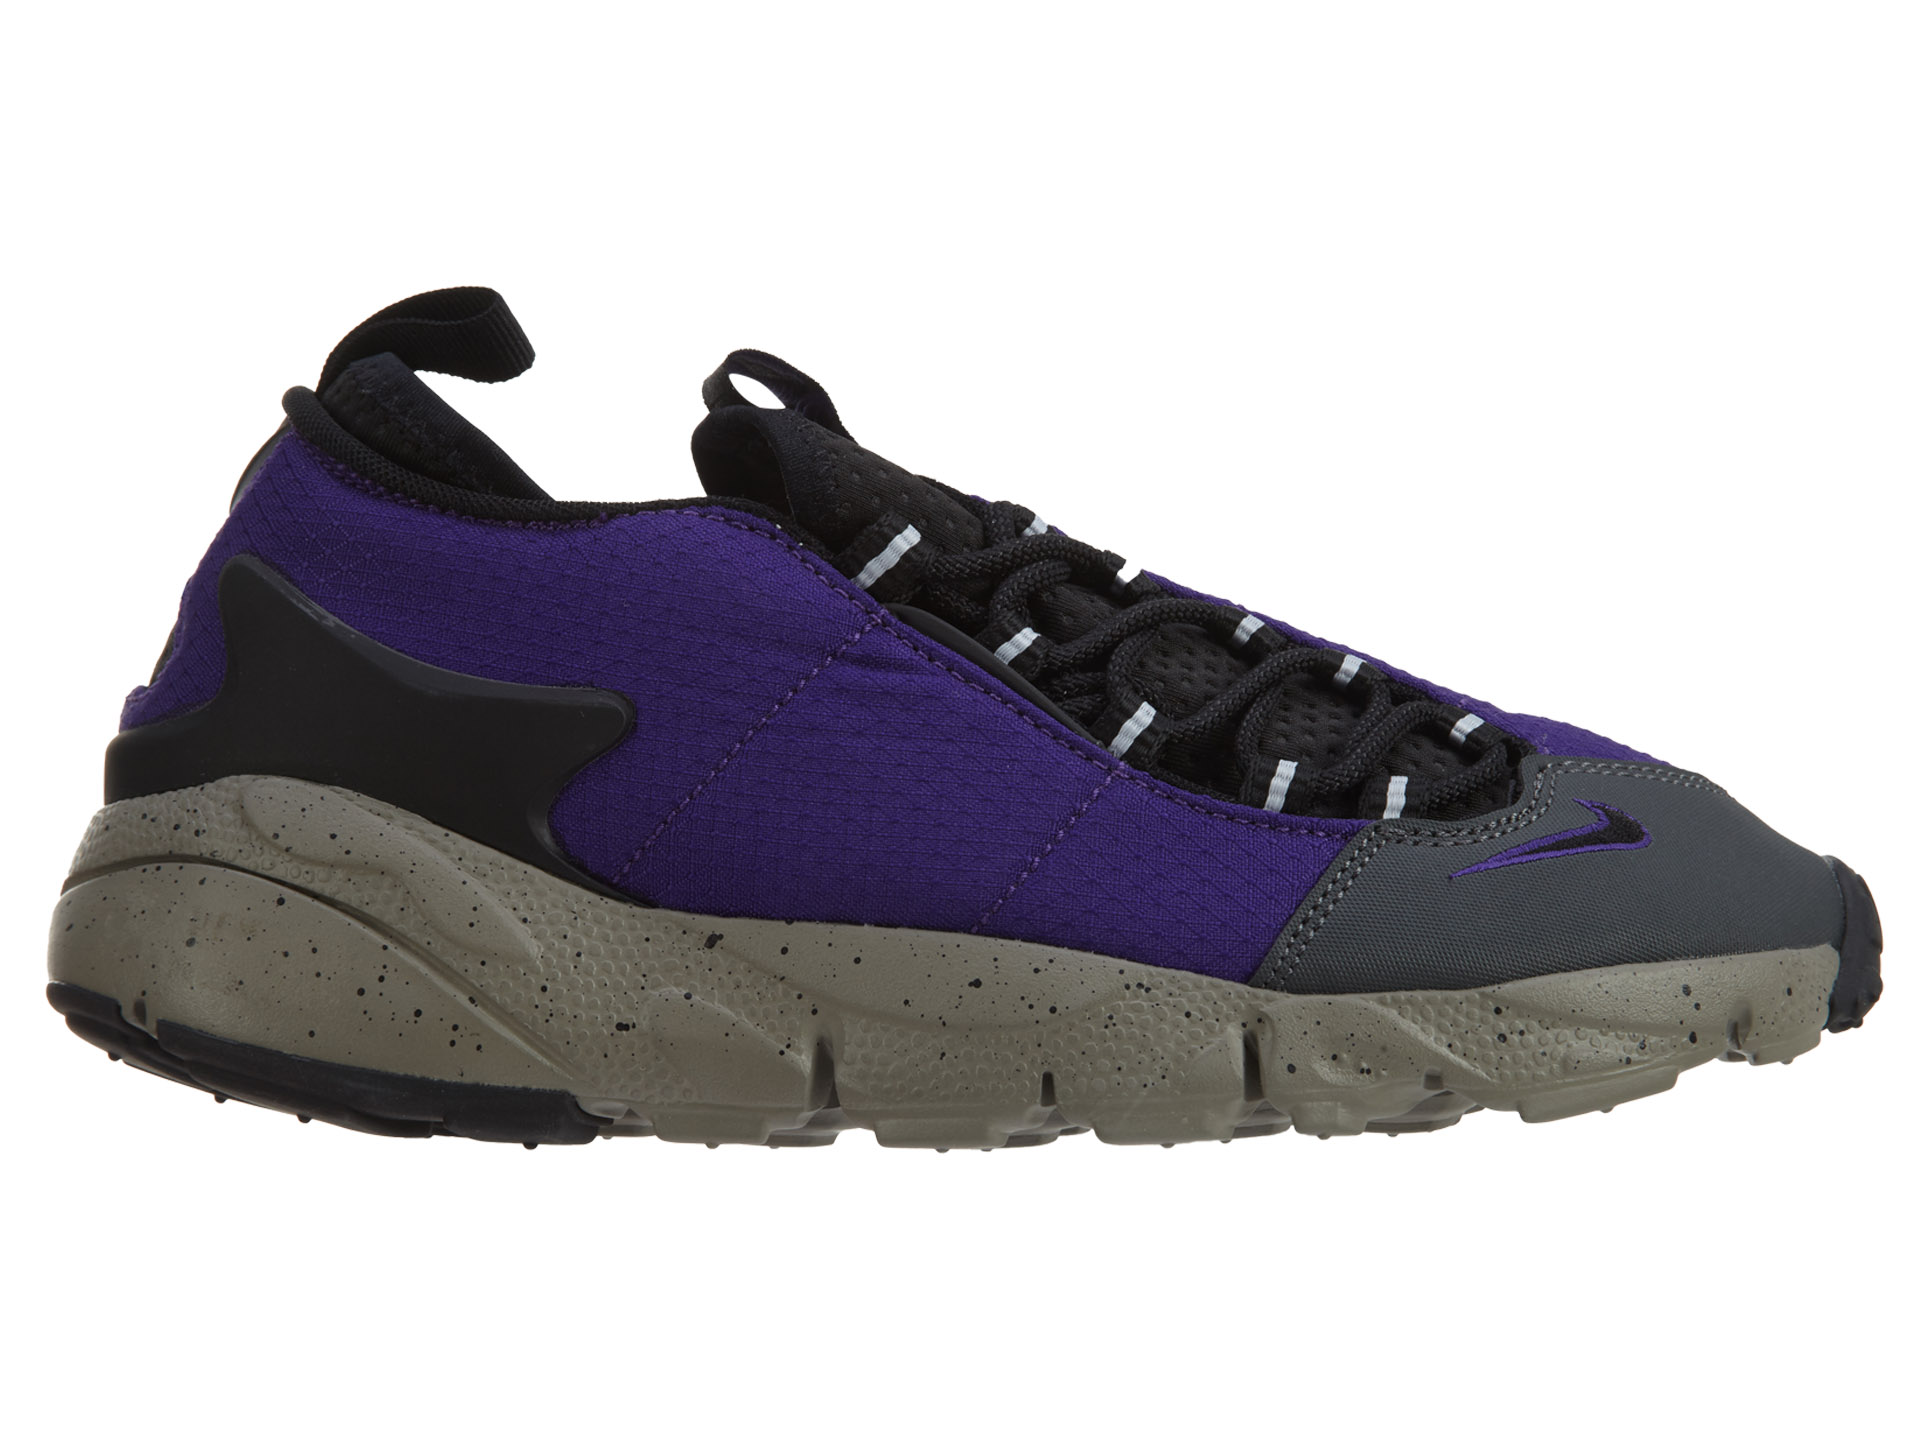 Nike Air Footscape Nm Court Purple/Black-Light Taupe メンズ ...